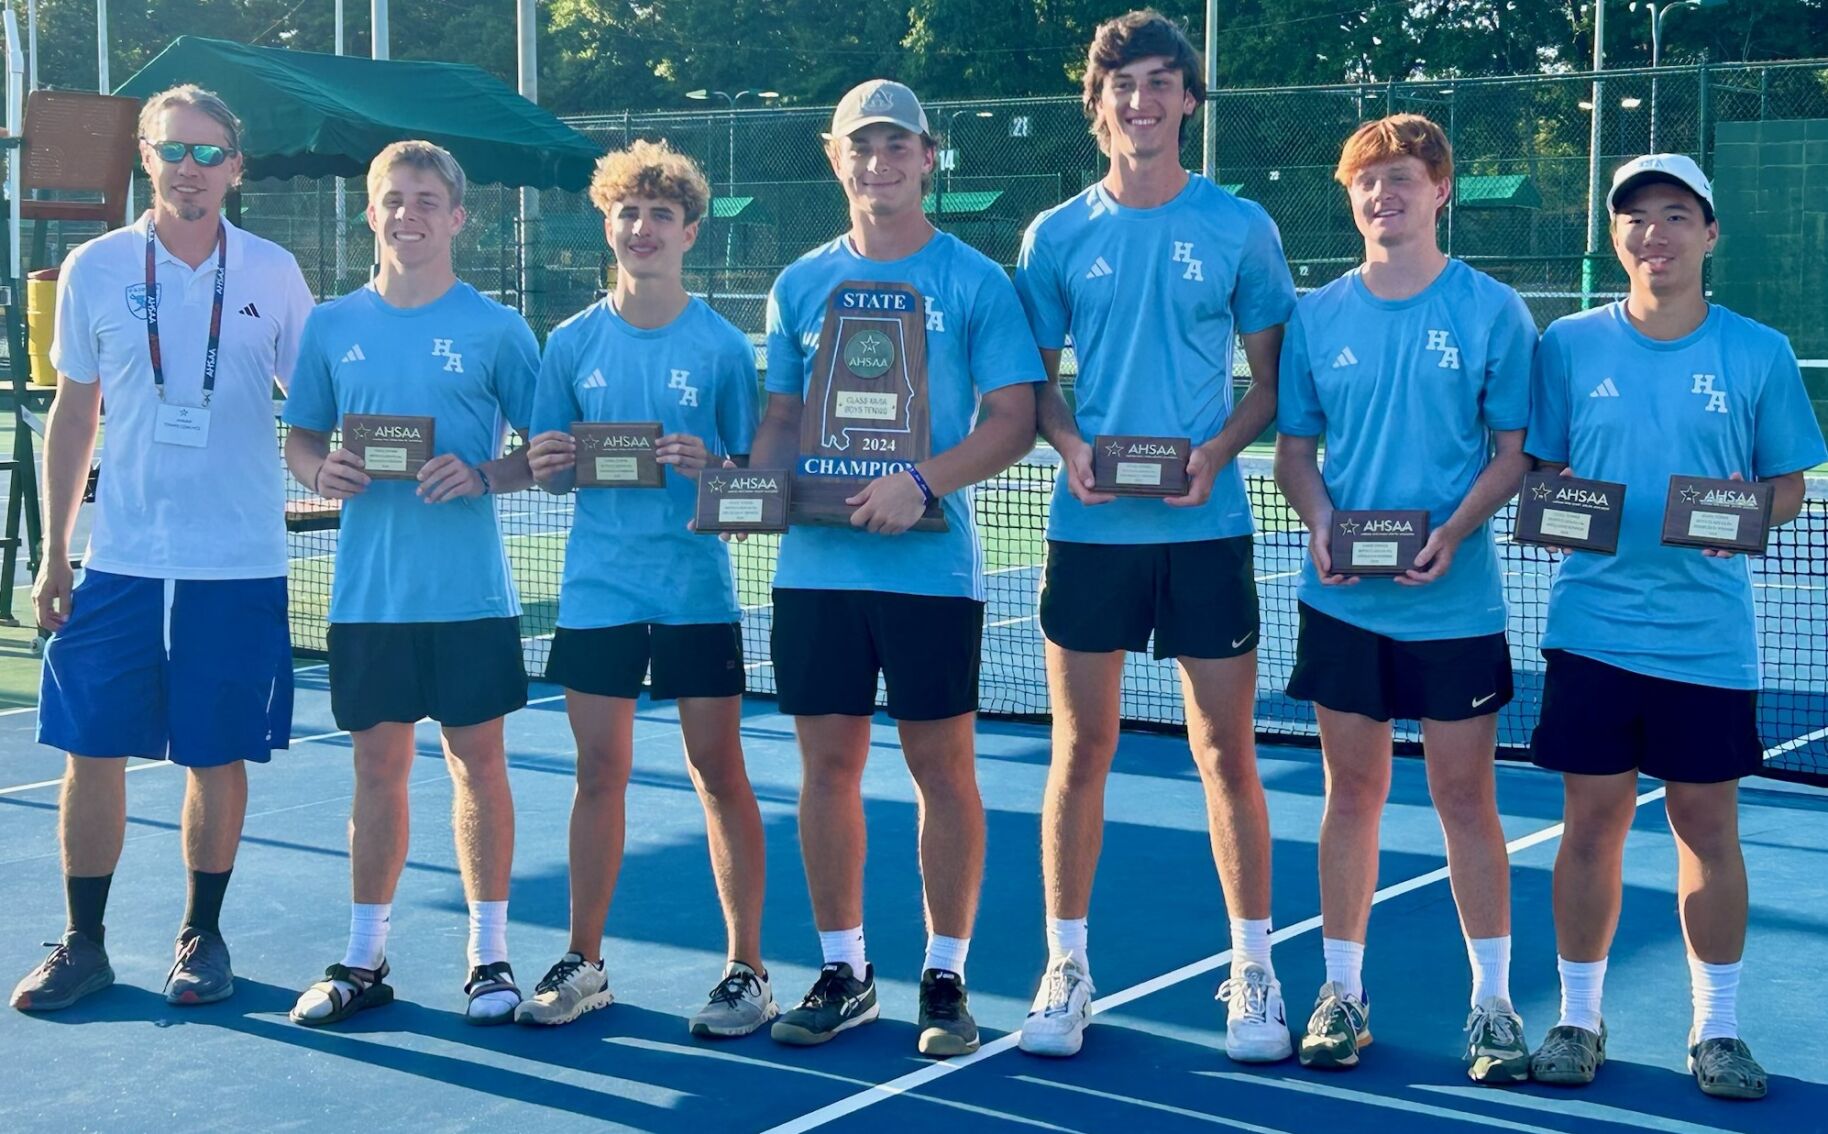 UPDATED: Houston Academy boys tennis team wins state title